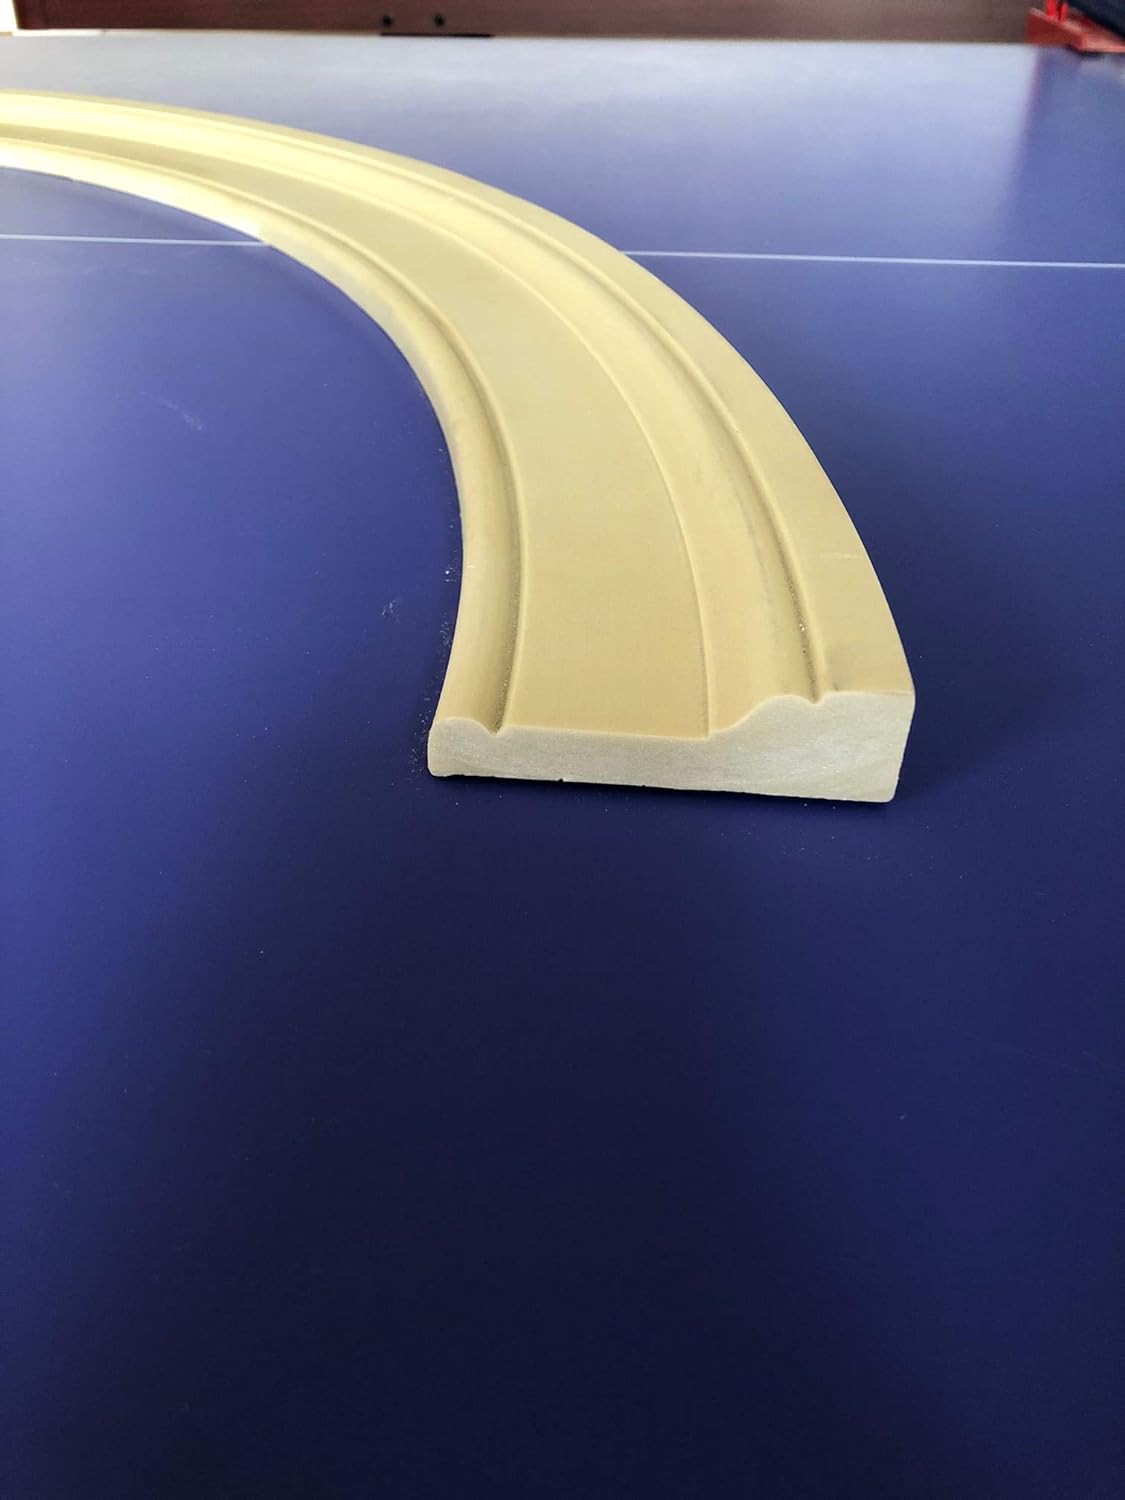 FLEXTRIM #97 Adams: Flexible Casing Molding: 1-1/16" Thick x 3-7/16" Wide - PRE Curved to fit Specific Half Round Arches: 26